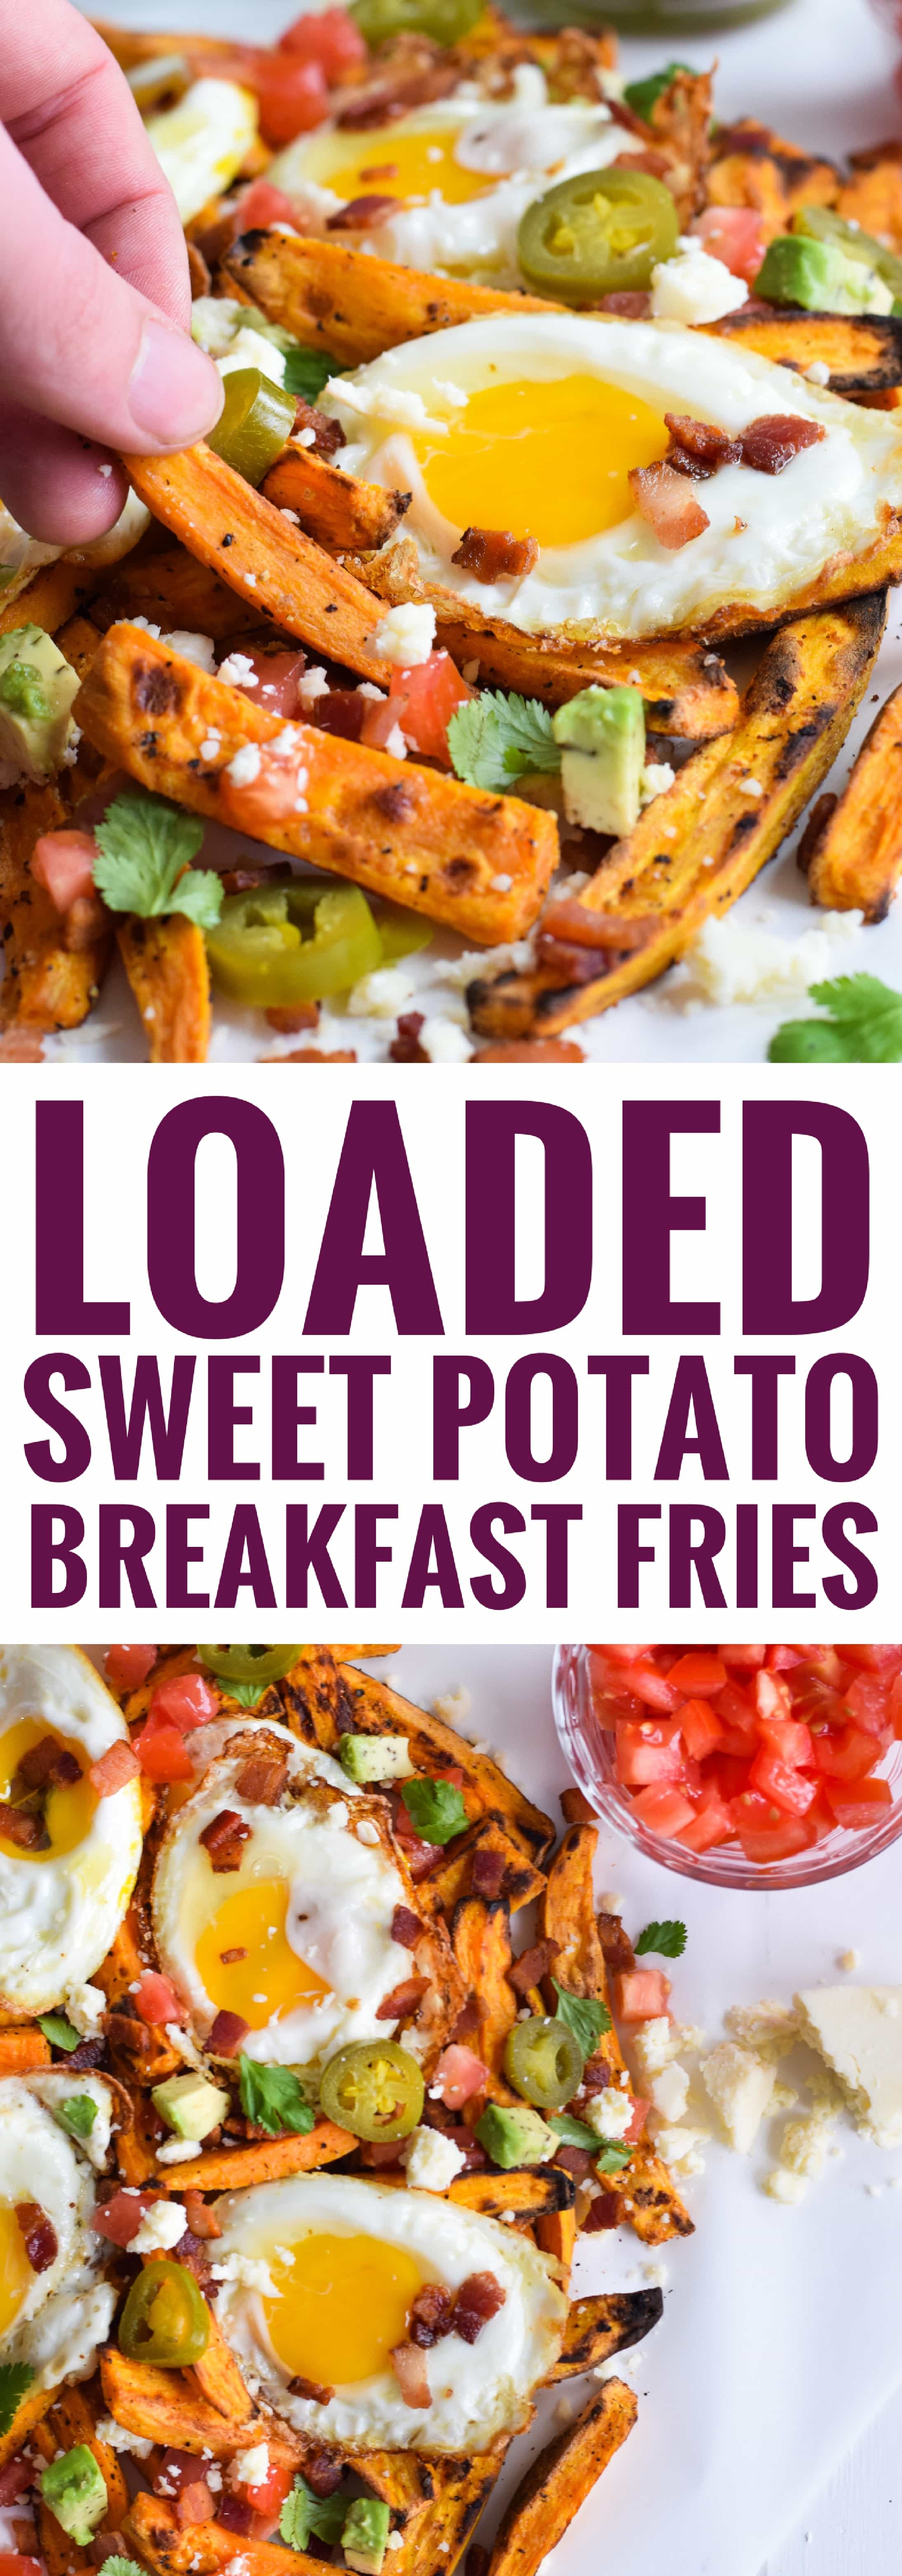 Baked Loaded Sweet Potato Breakfast Fries topped with sunny side up eggs, bacon, avocados and cotija cheese are sure to be your new favorite weekend breakfast.